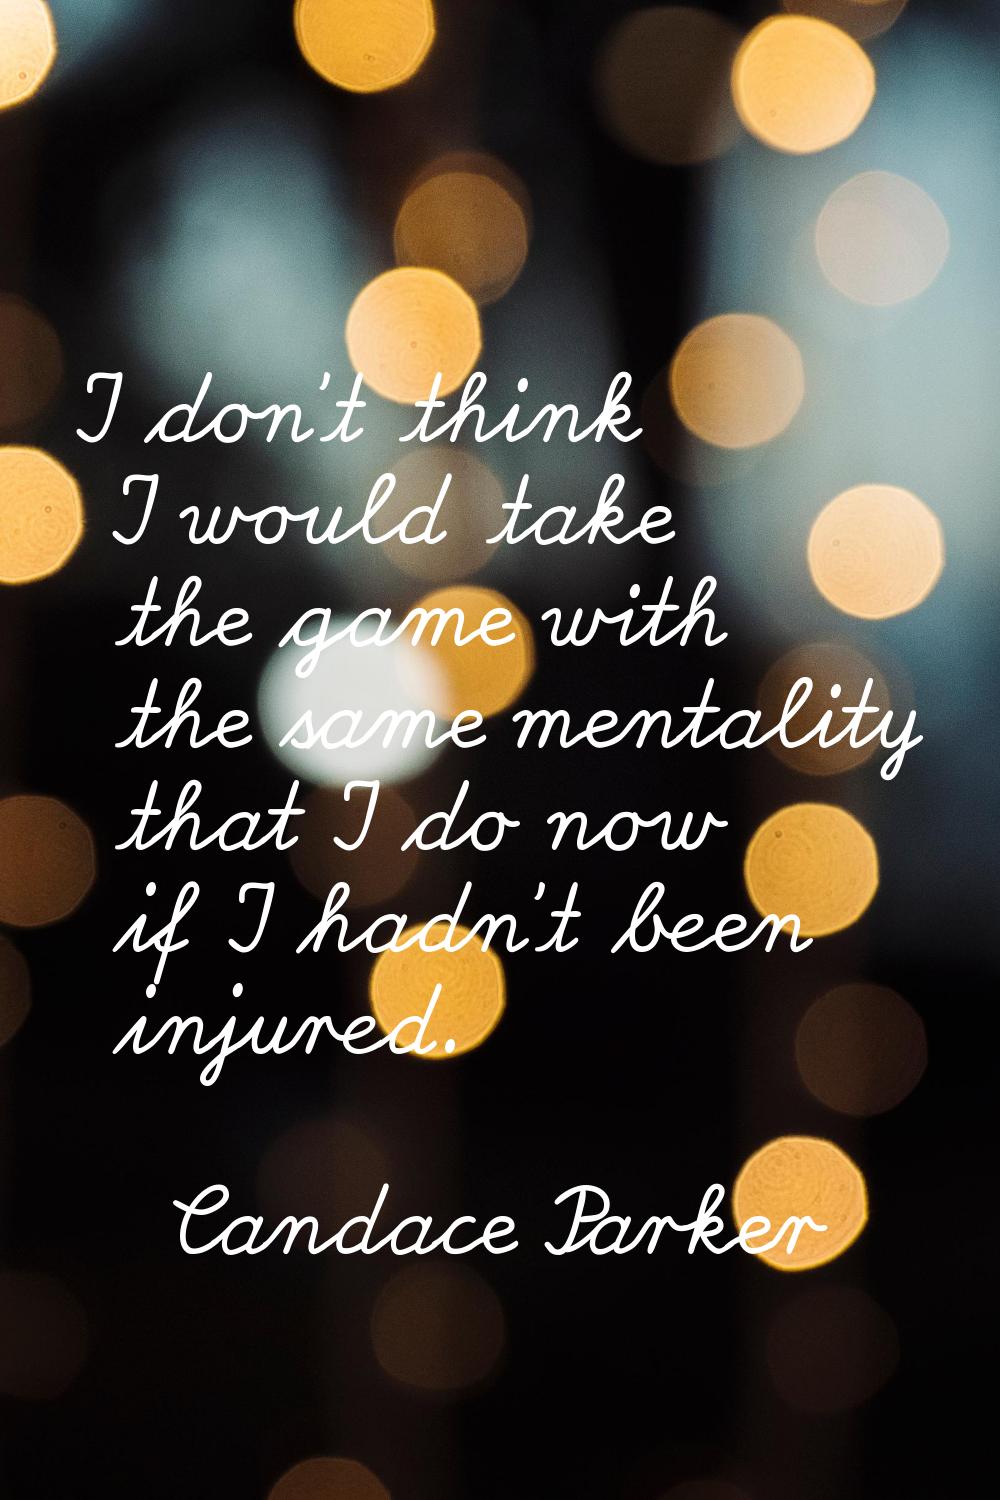 I don't think I would take the game with the same mentality that I do now if I hadn't been injured.